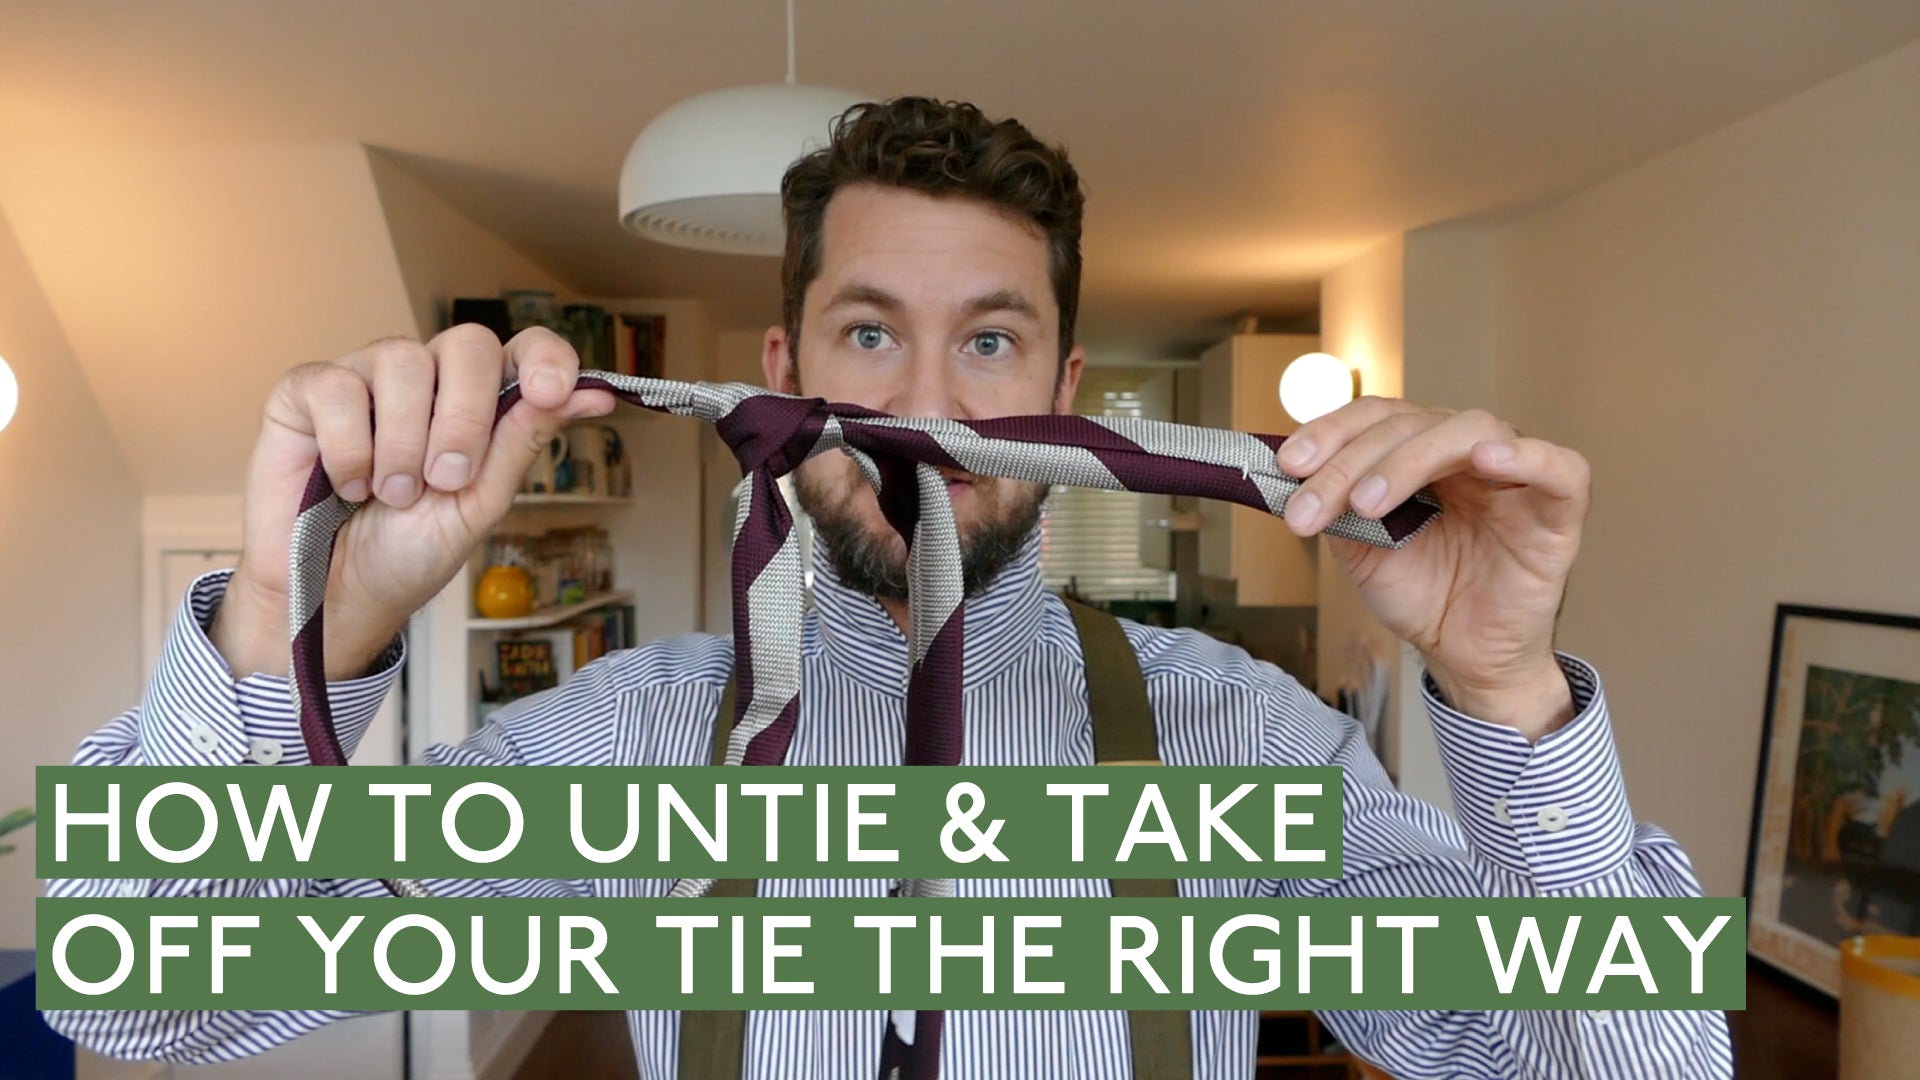 How To Untie & Take Off Your Tie The Right Way